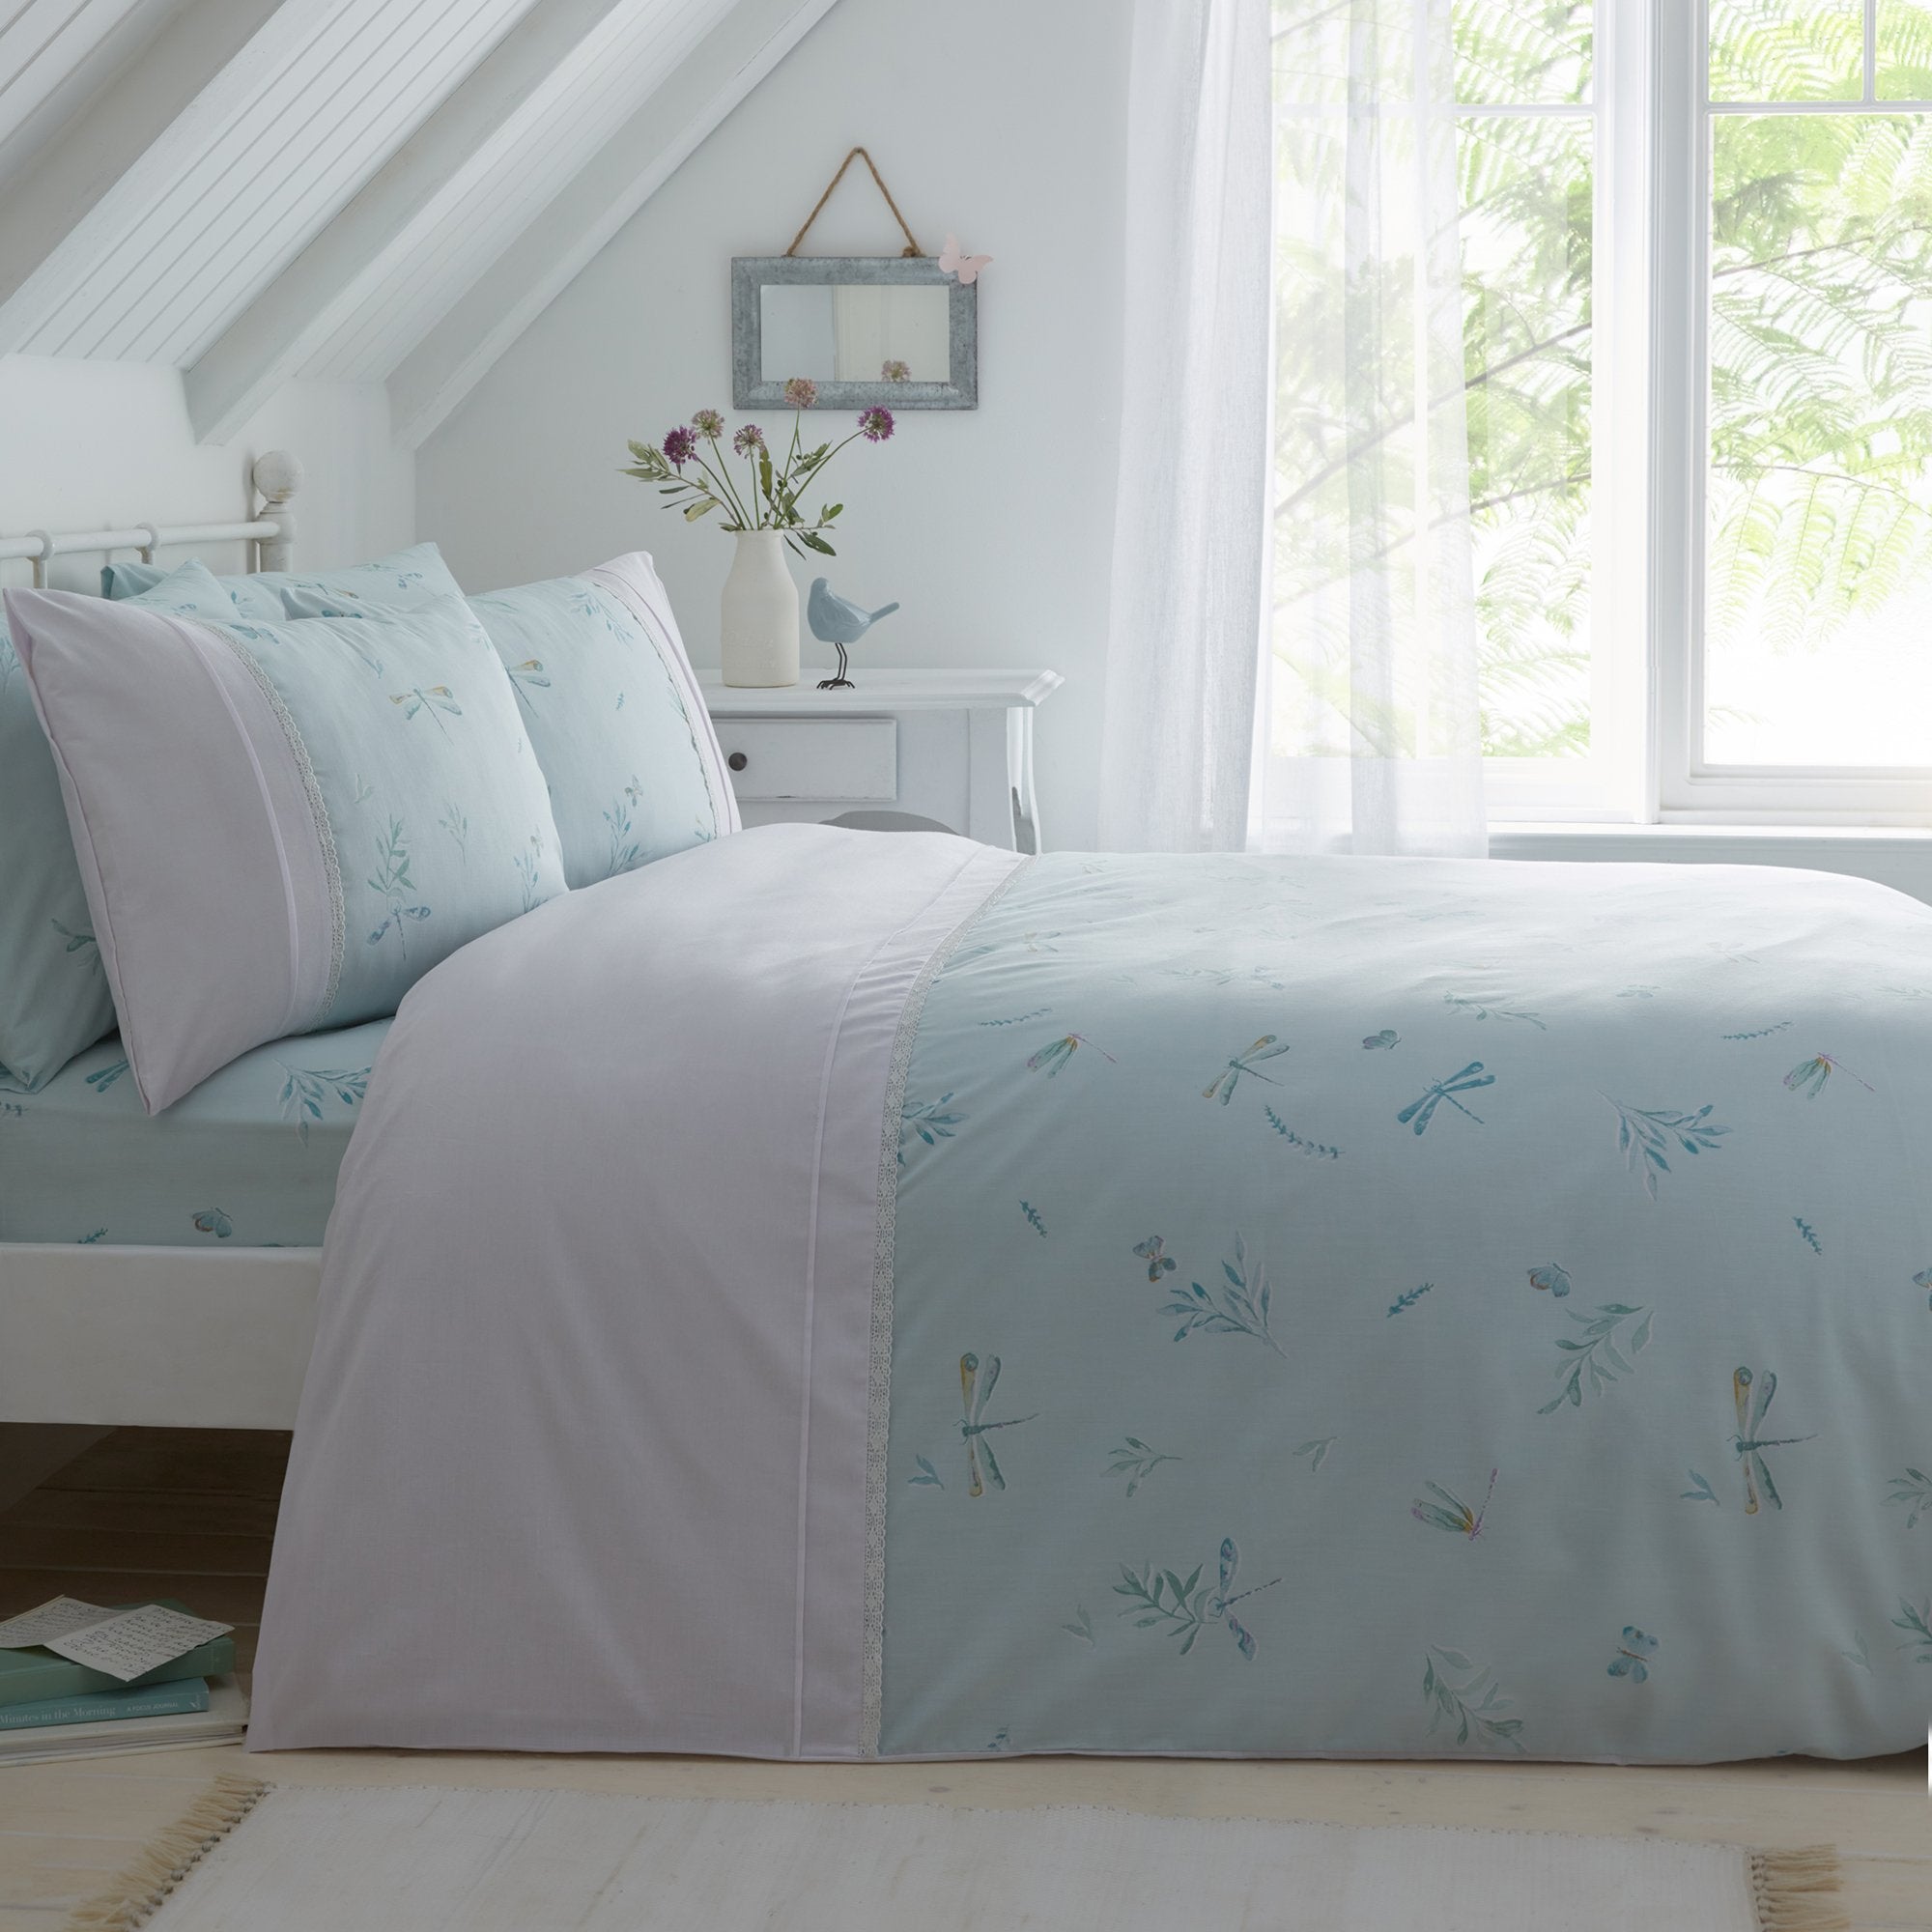 Duvet Cover Set Fifi by Dreams & Drapes Decorative in Duck Egg